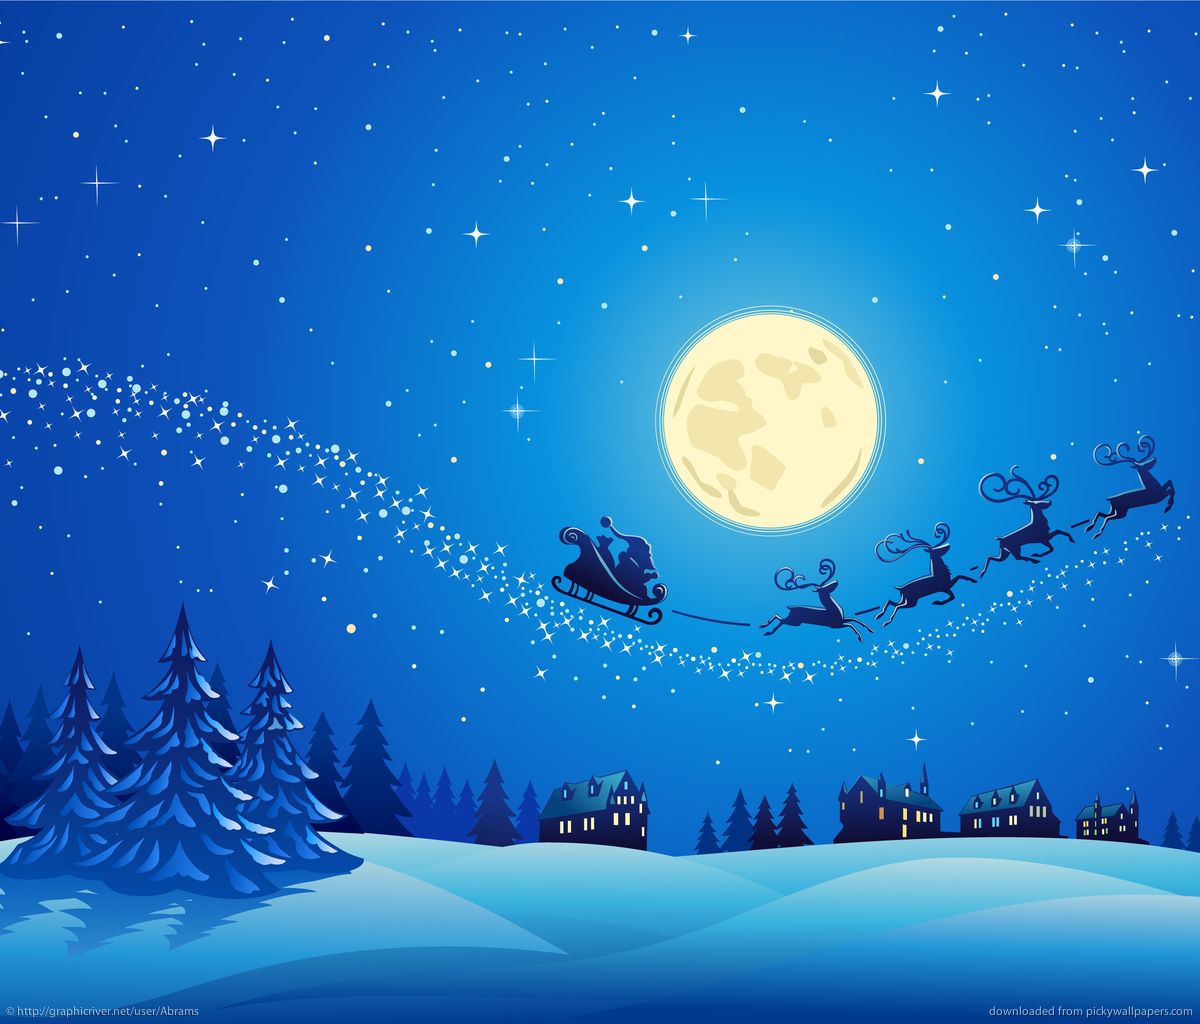 Collection of Christmas Winter Scenes Wallpaper Free on HDWallpaper 1200x1024